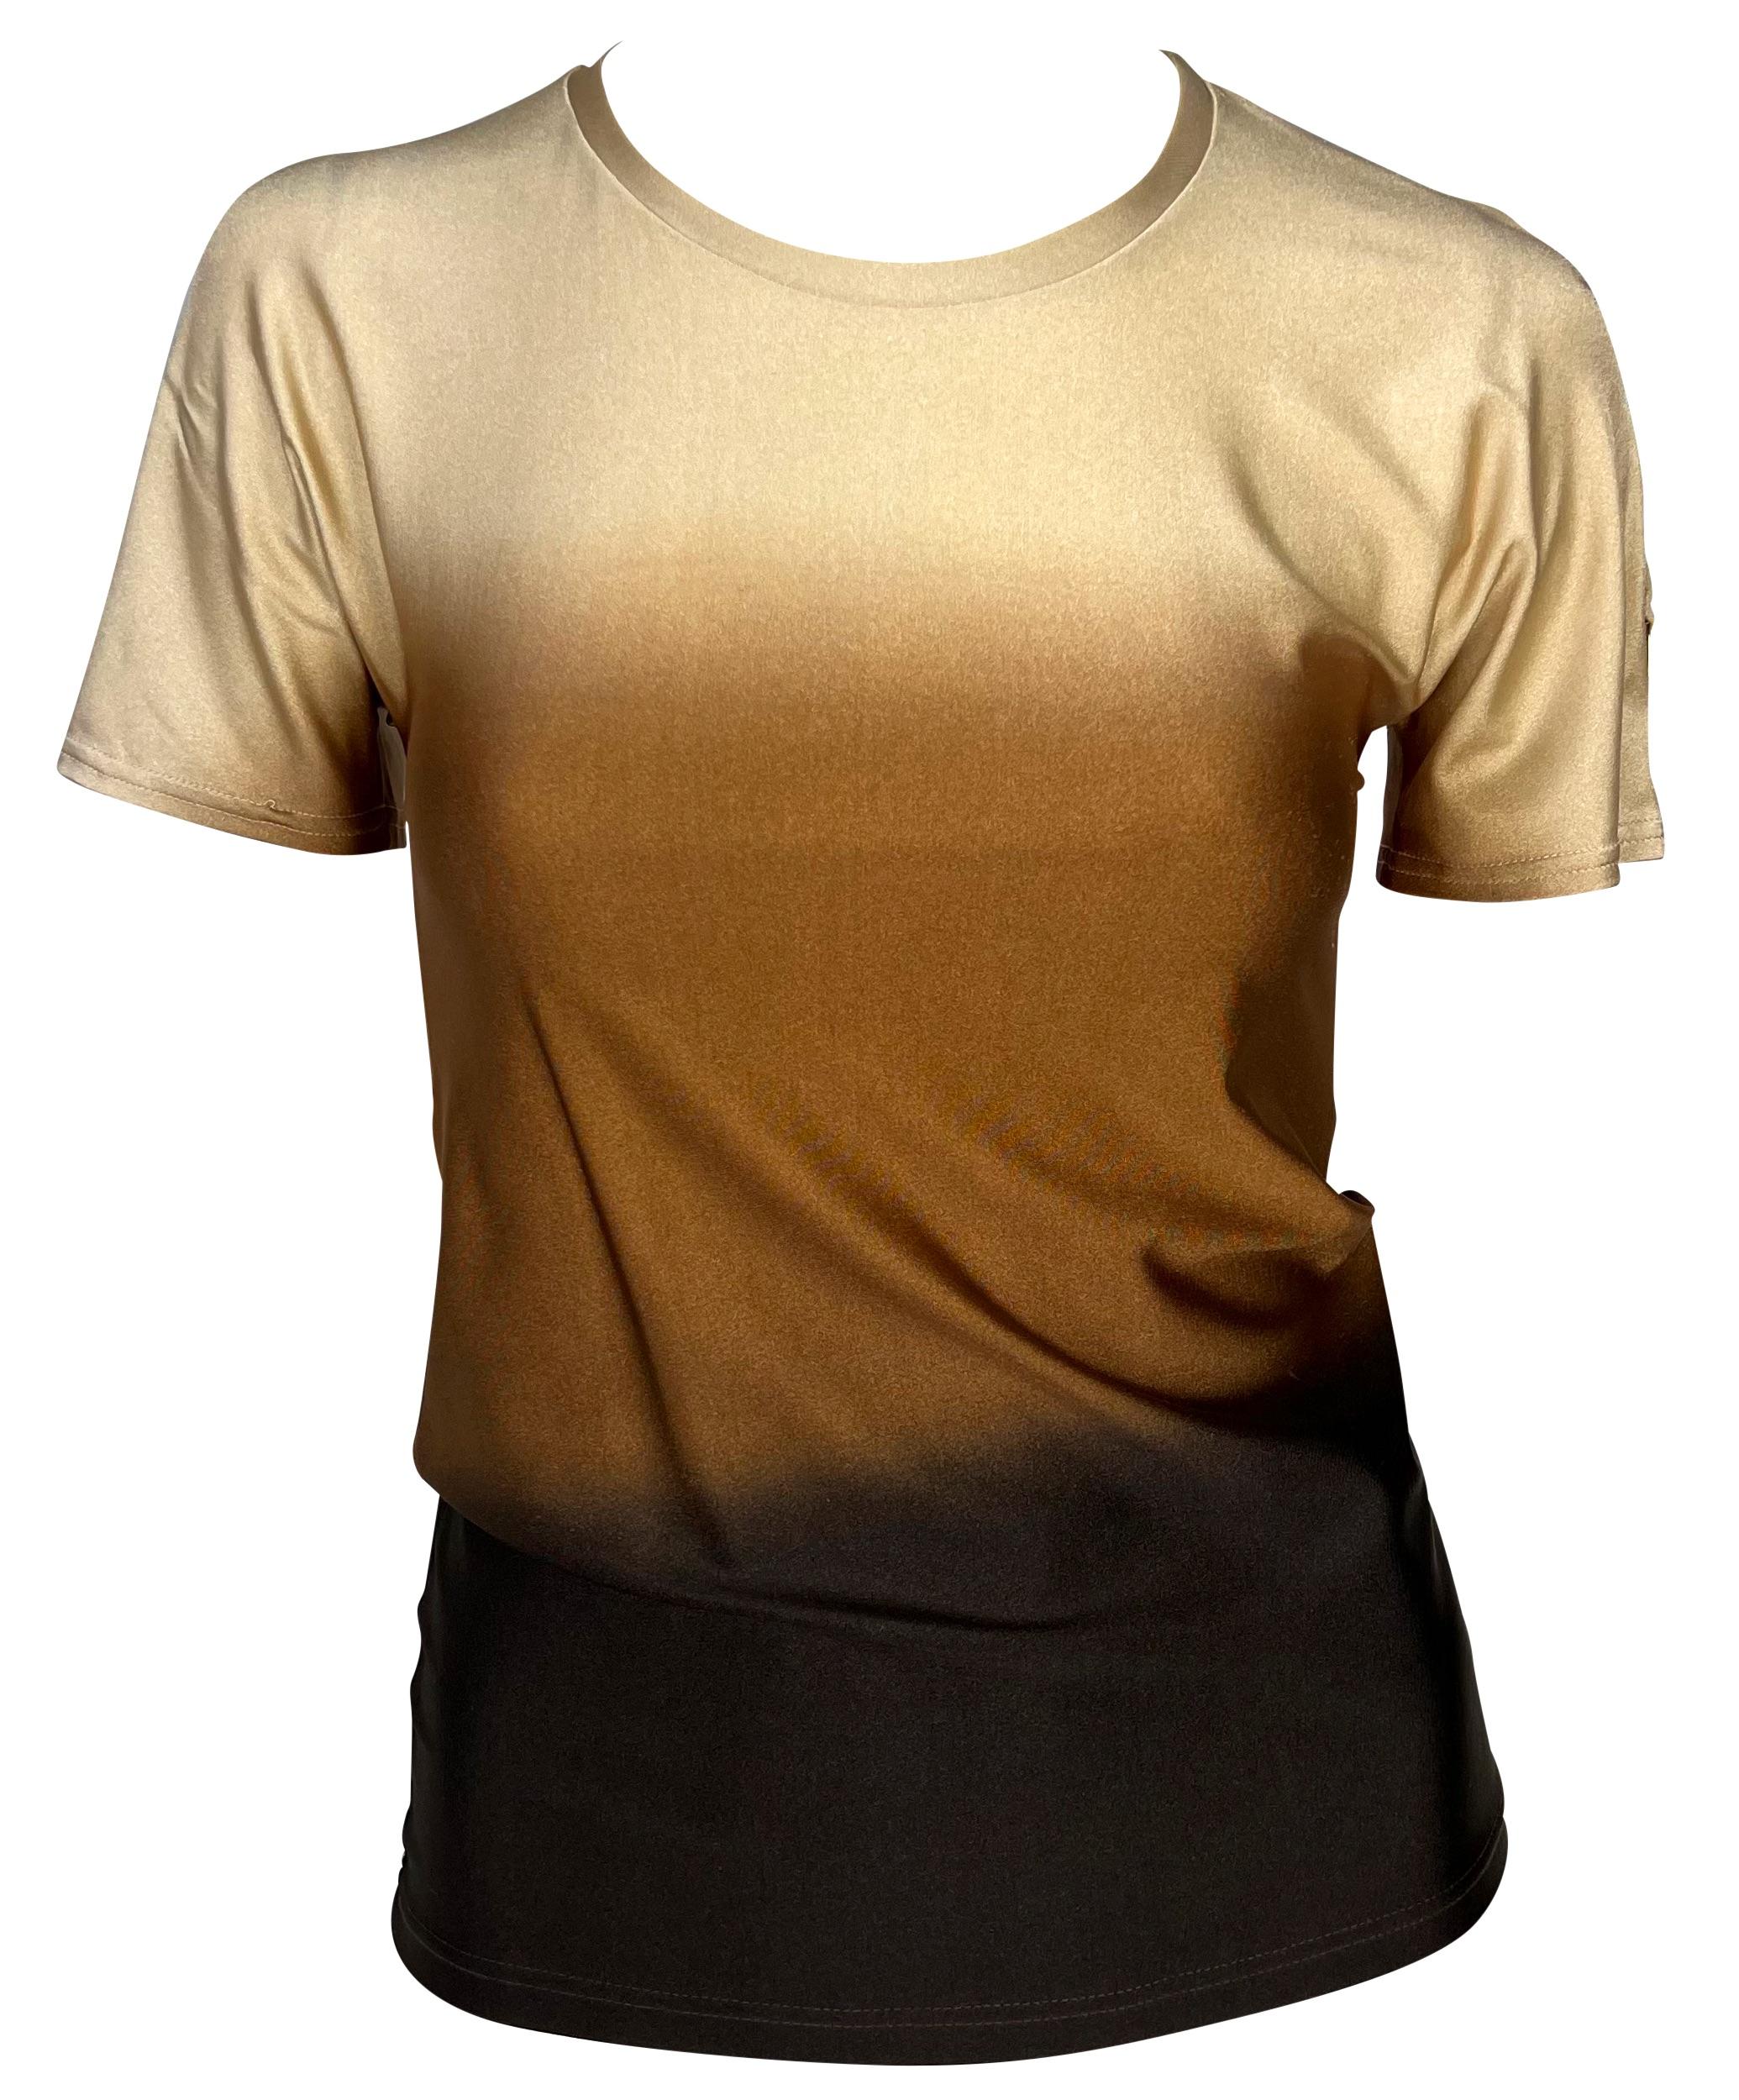 S/S 1997 Gucci by Tom Ford 'G' Medallion Beige Brown Ombré Stretch Swim Top 2